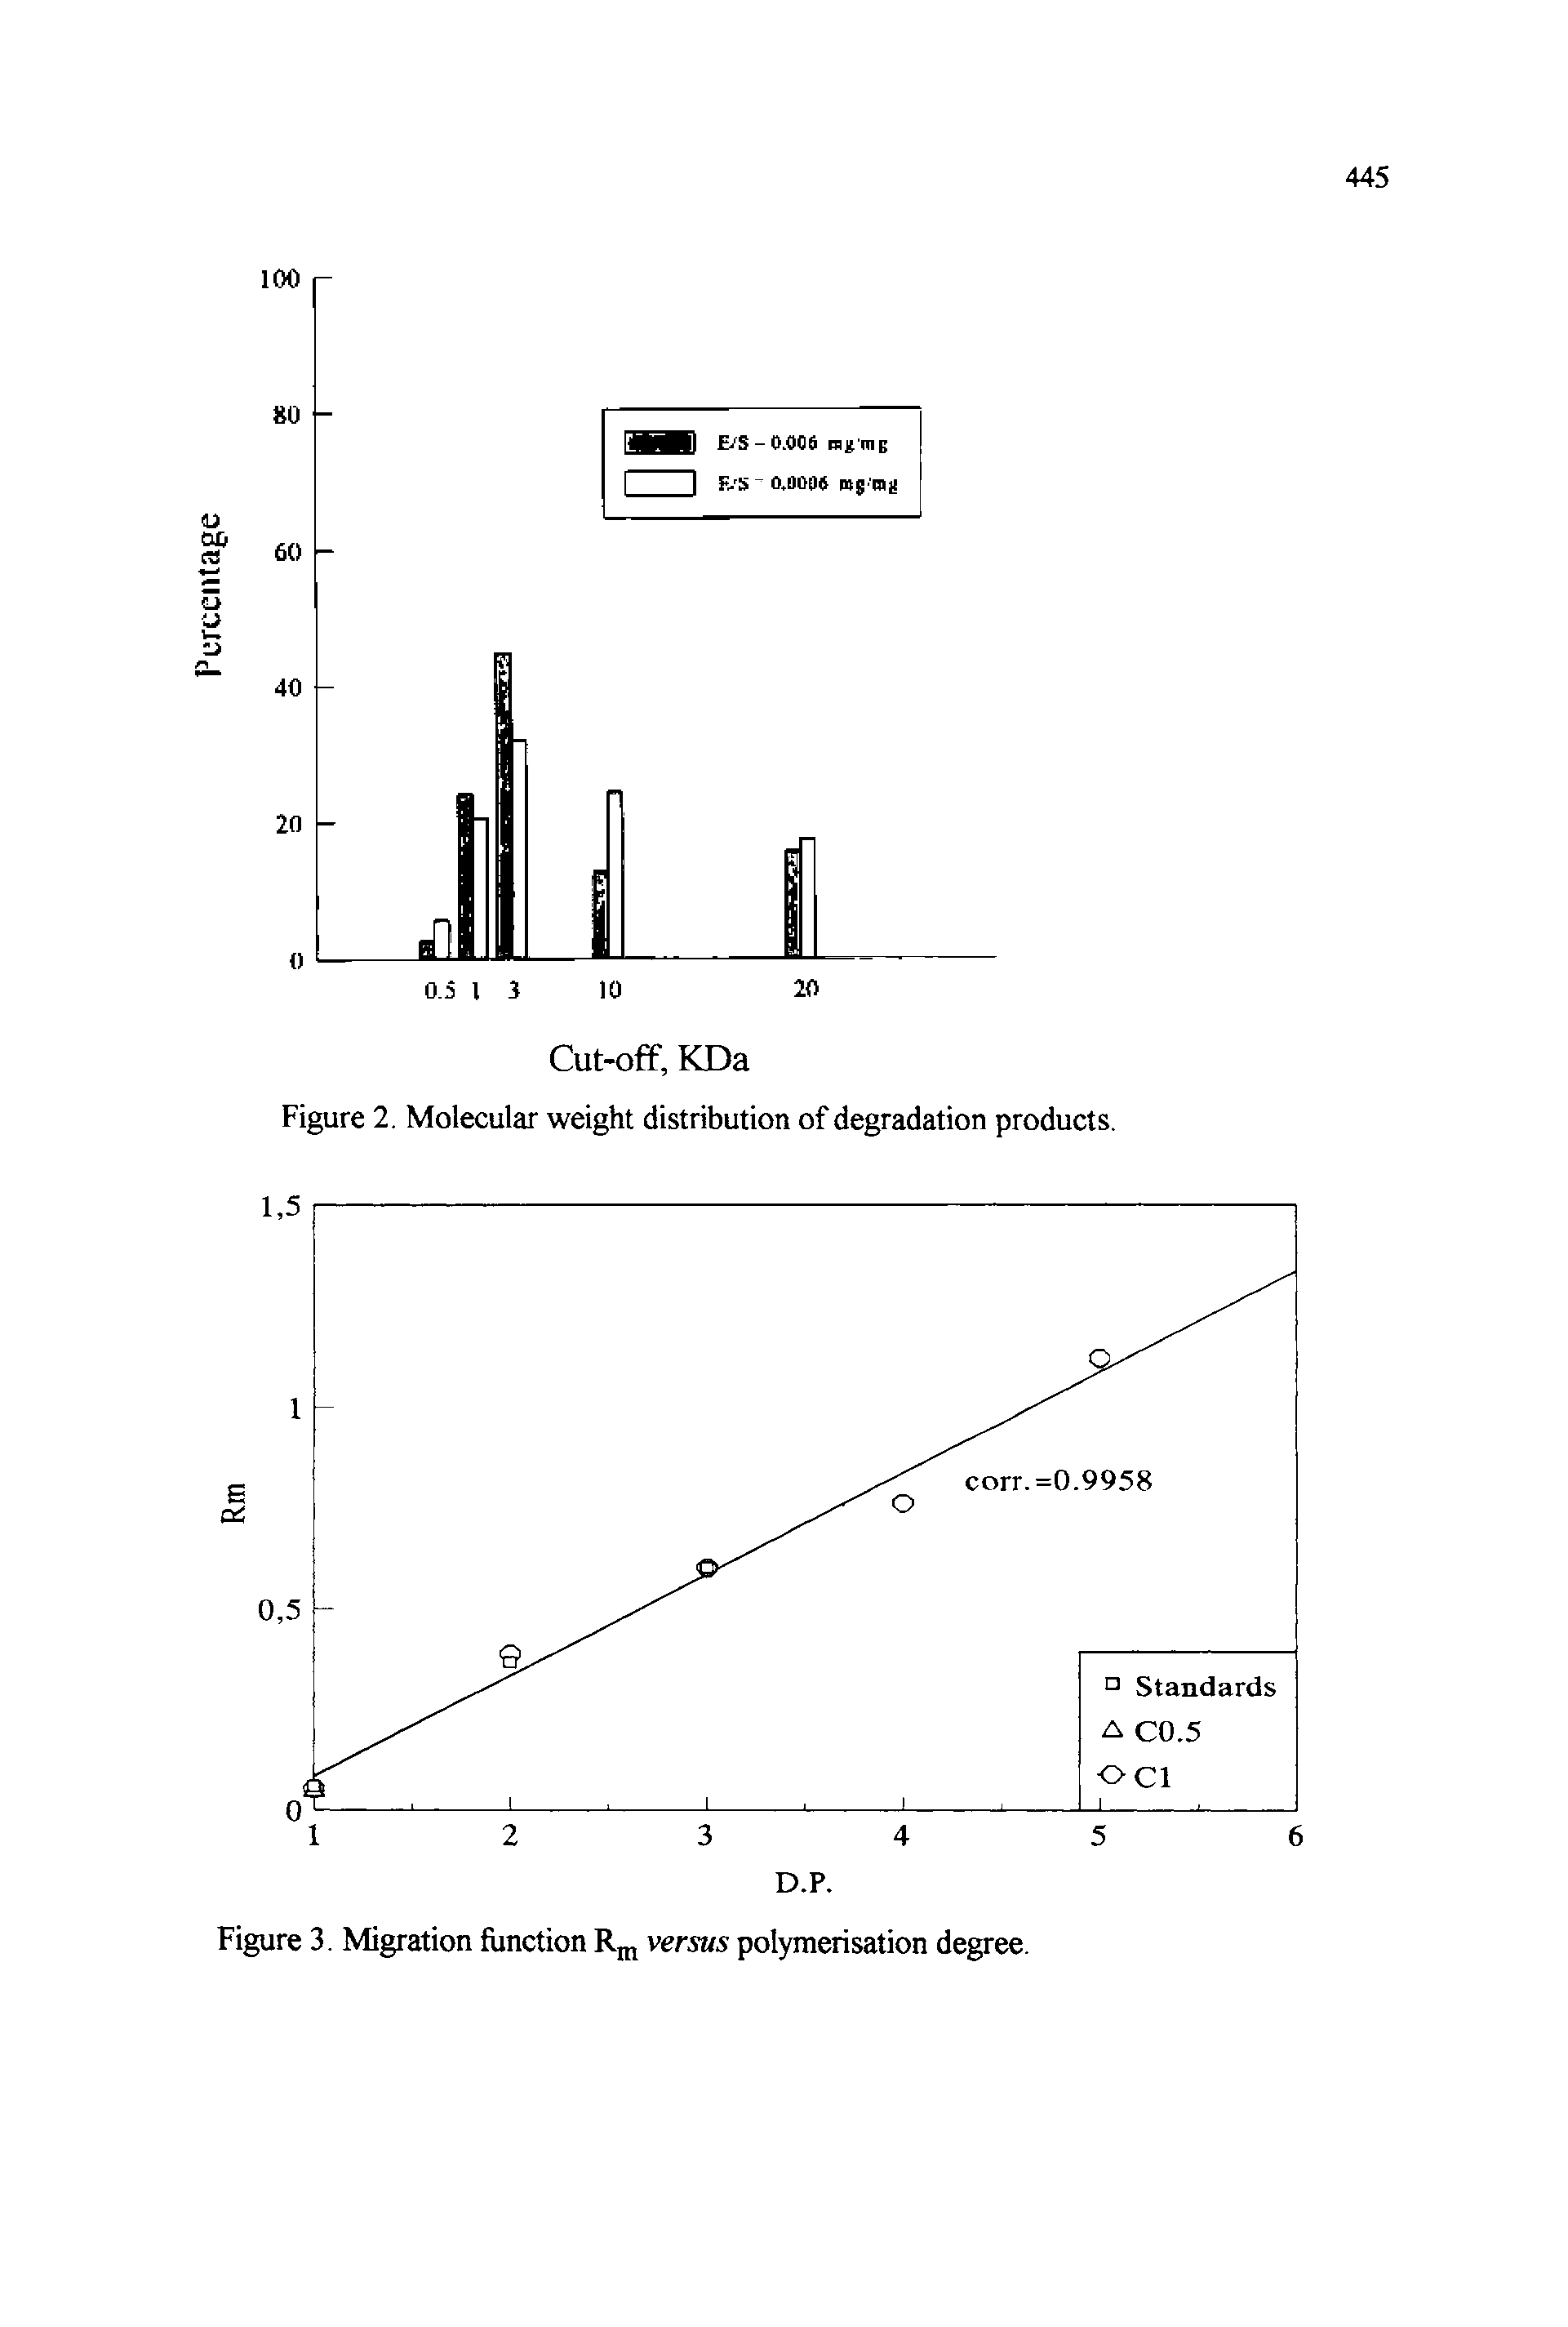 Figure 2. Molecular weight distribution of degradation products.